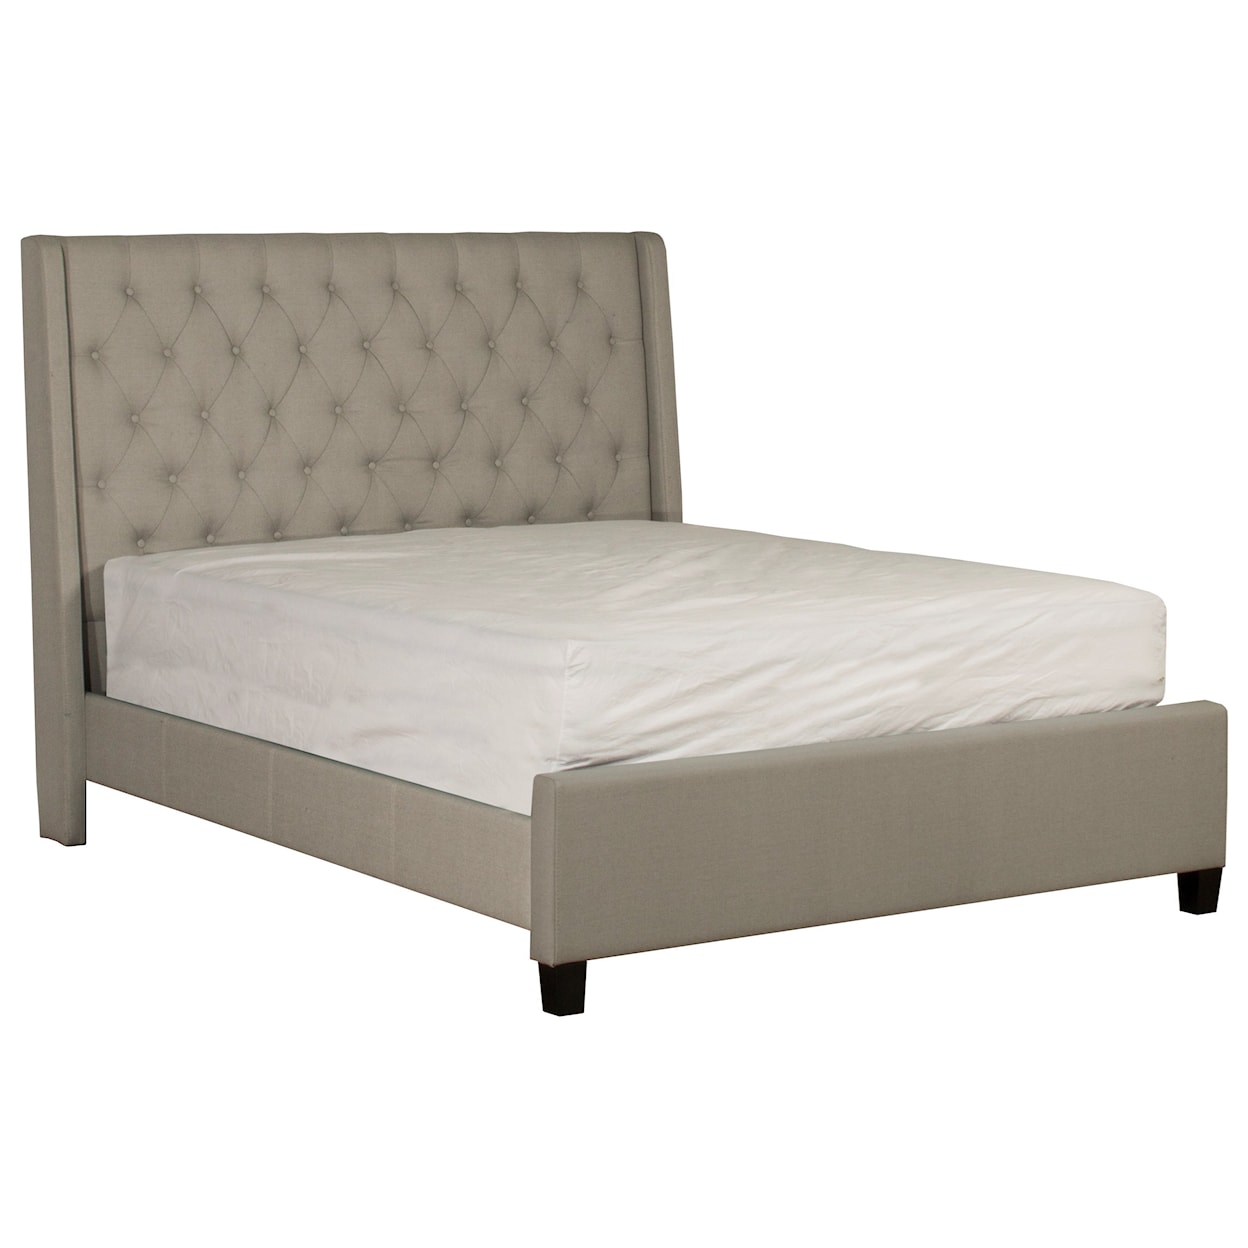 Hillsdale Churchill Queen Upholstered Bed